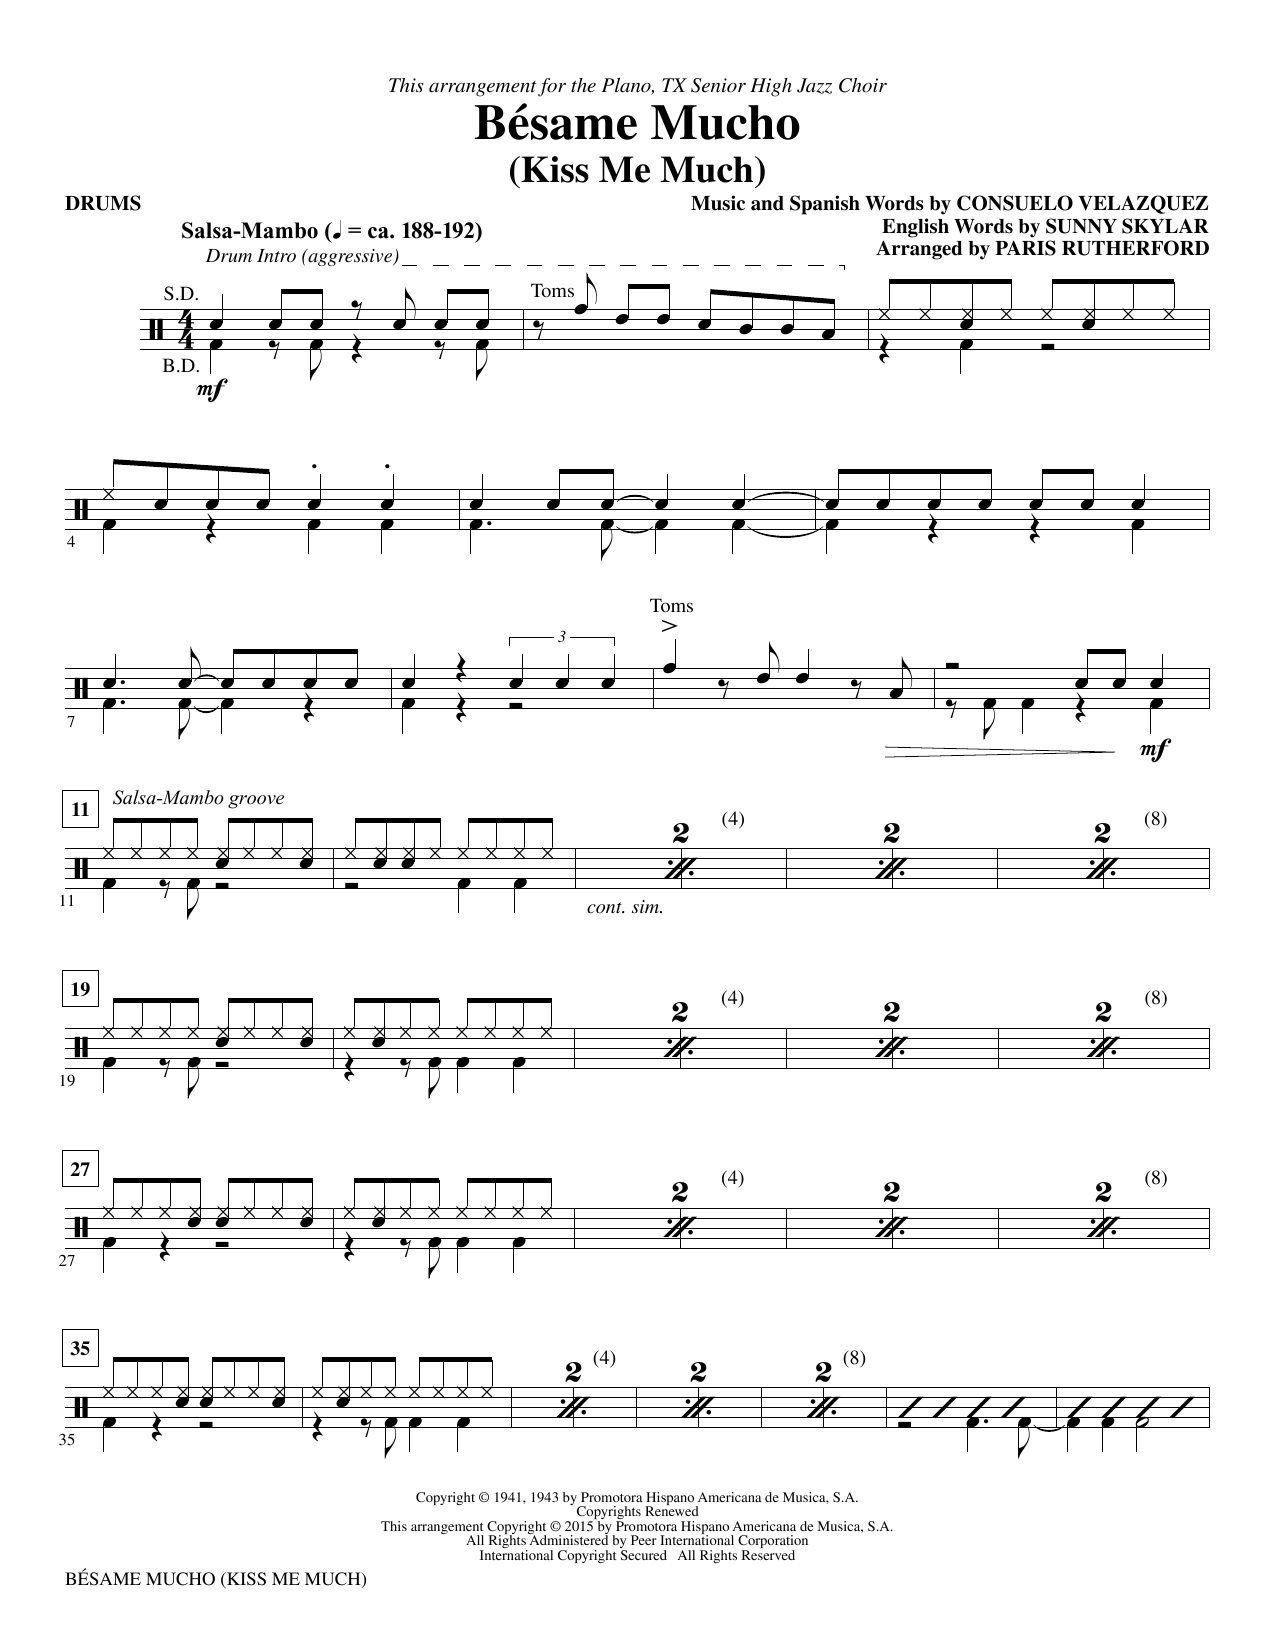 Paris Rutherford Besame Mucho (Kiss Me Much) - Drums sheet music notes and chords. Download Printable PDF.